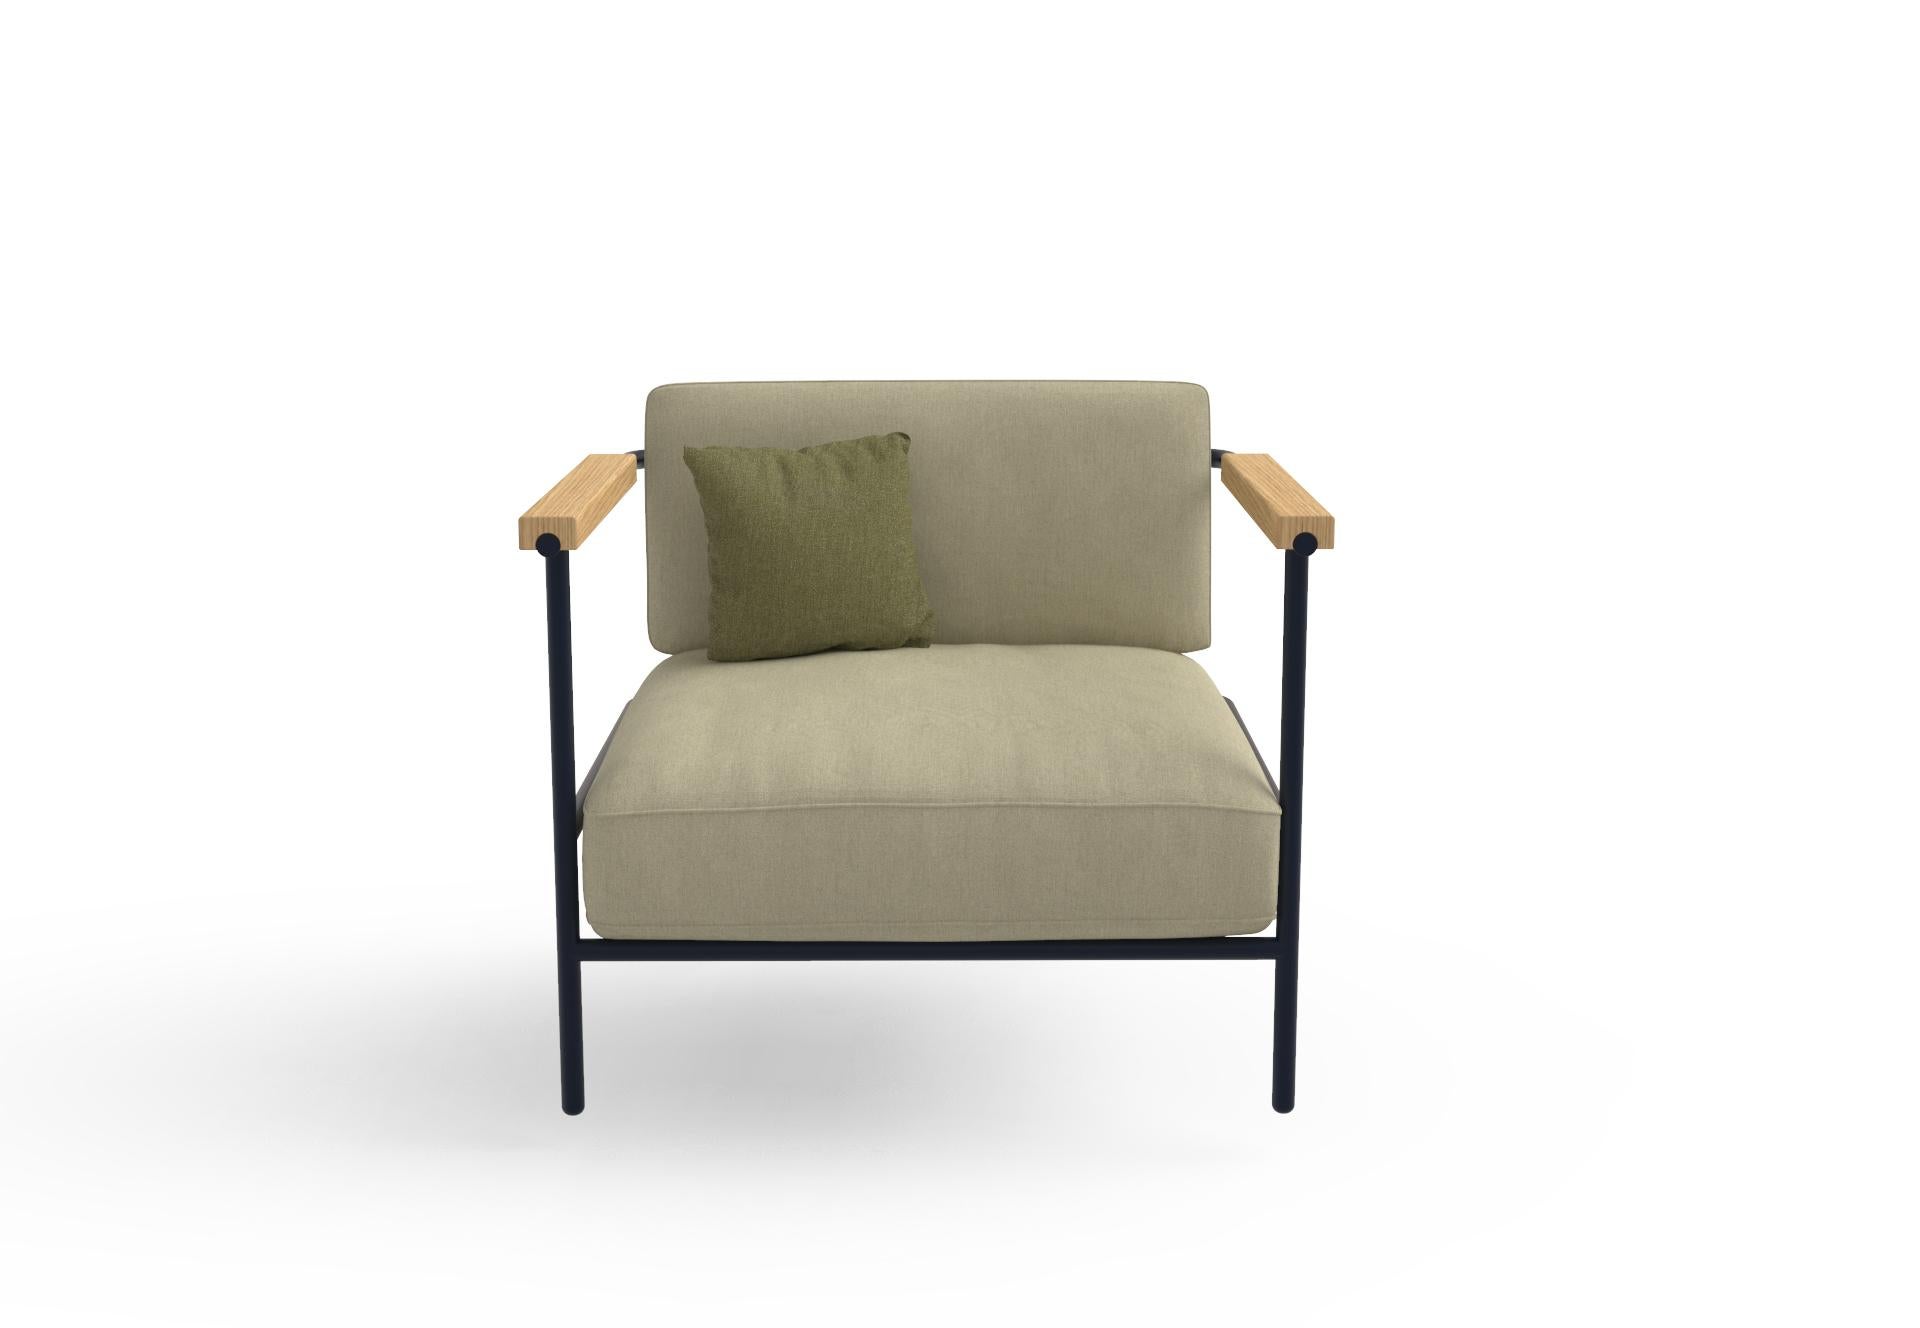 Av. México Armchair, Powder-Coated Metal and Fabric, Contemporary Mexican Design For Sale 1